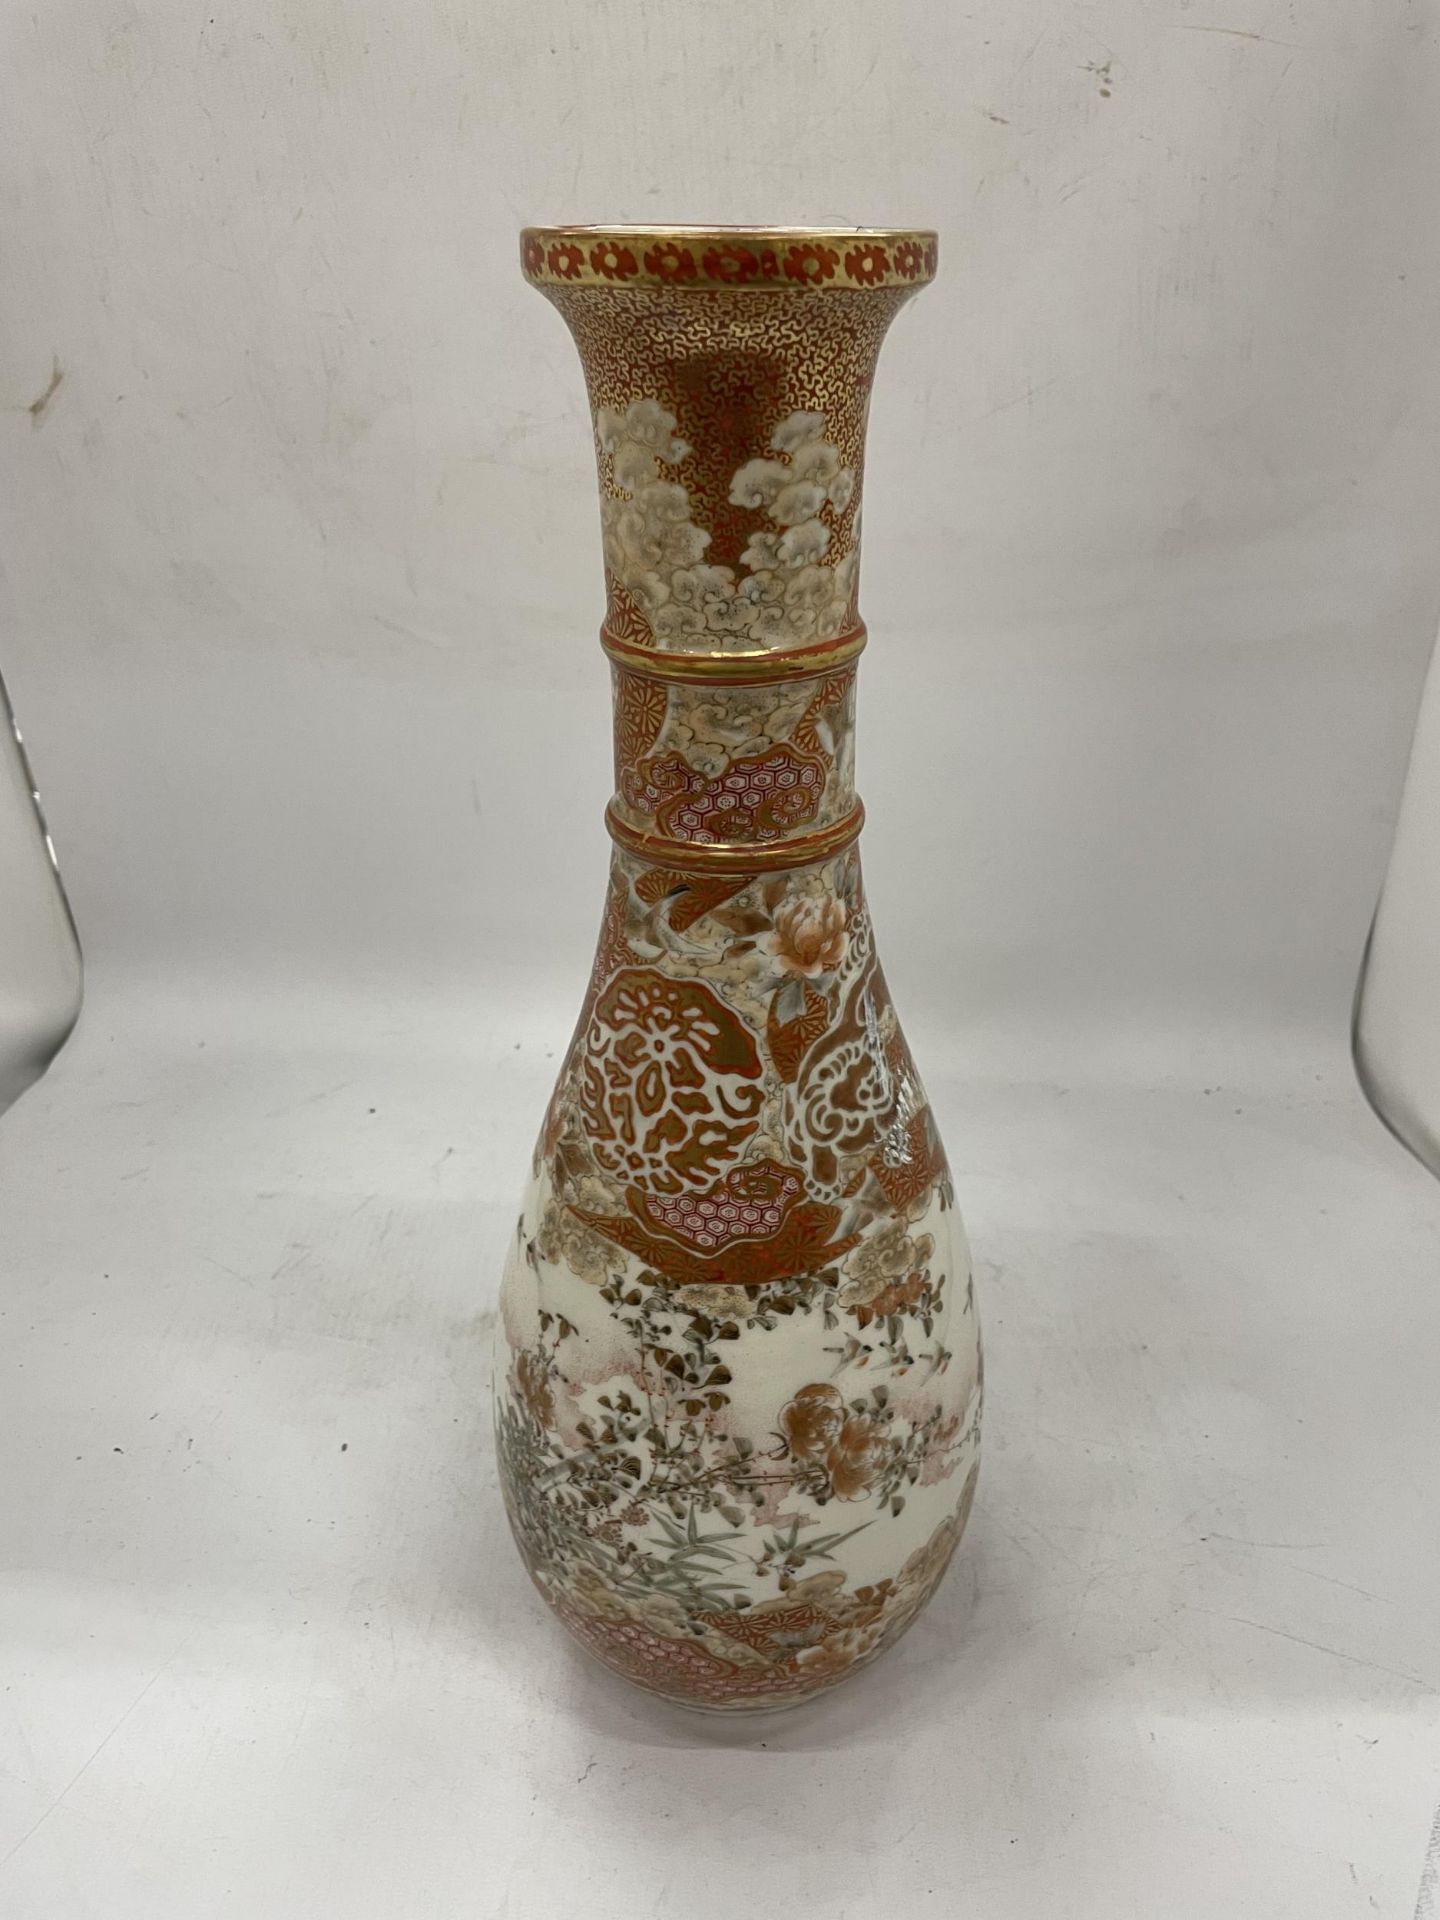 A JAPANESE MEIJI PERIOD (1868-1912) KUTANI BIRD AND FLORAL DESIGN TALL VASE, SIX CHARACTER MARK TO